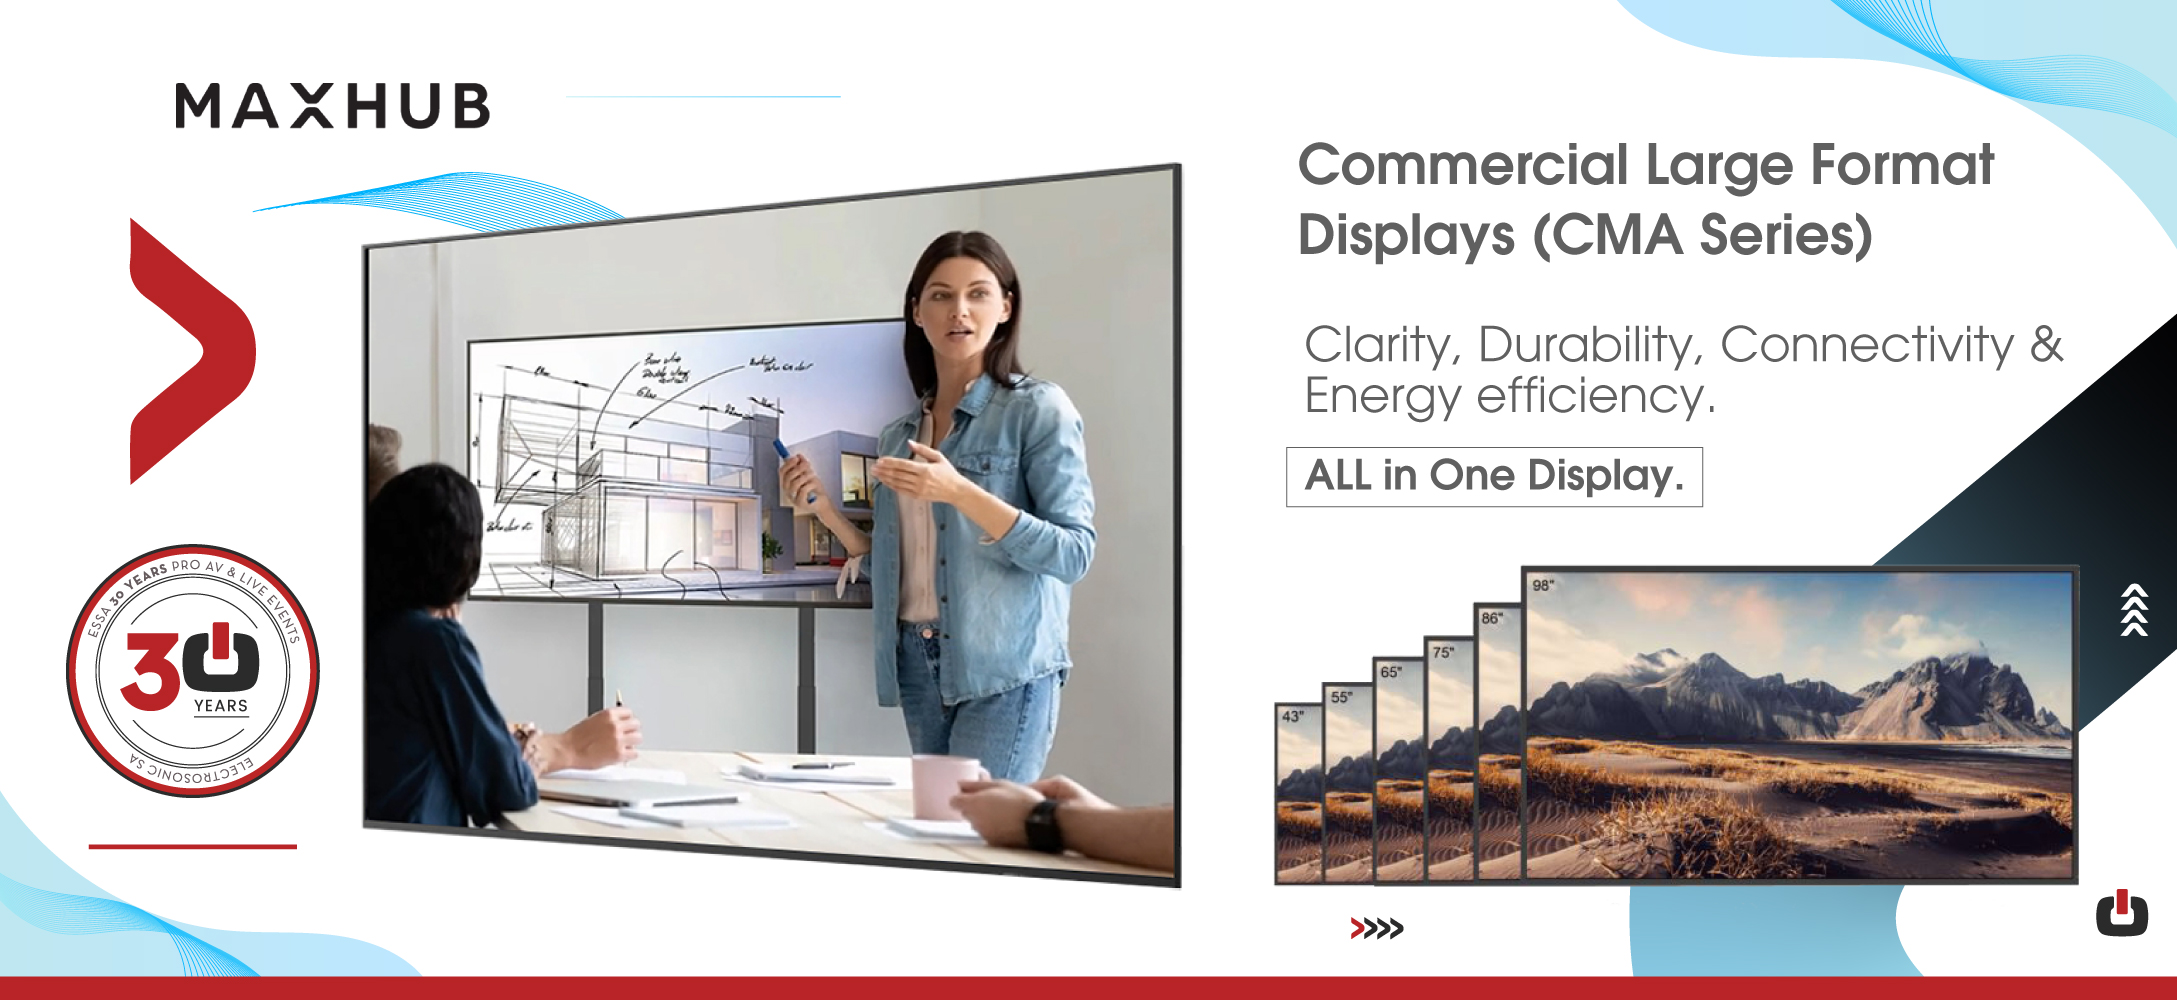 MAXHUB Commercial Large Format Displays